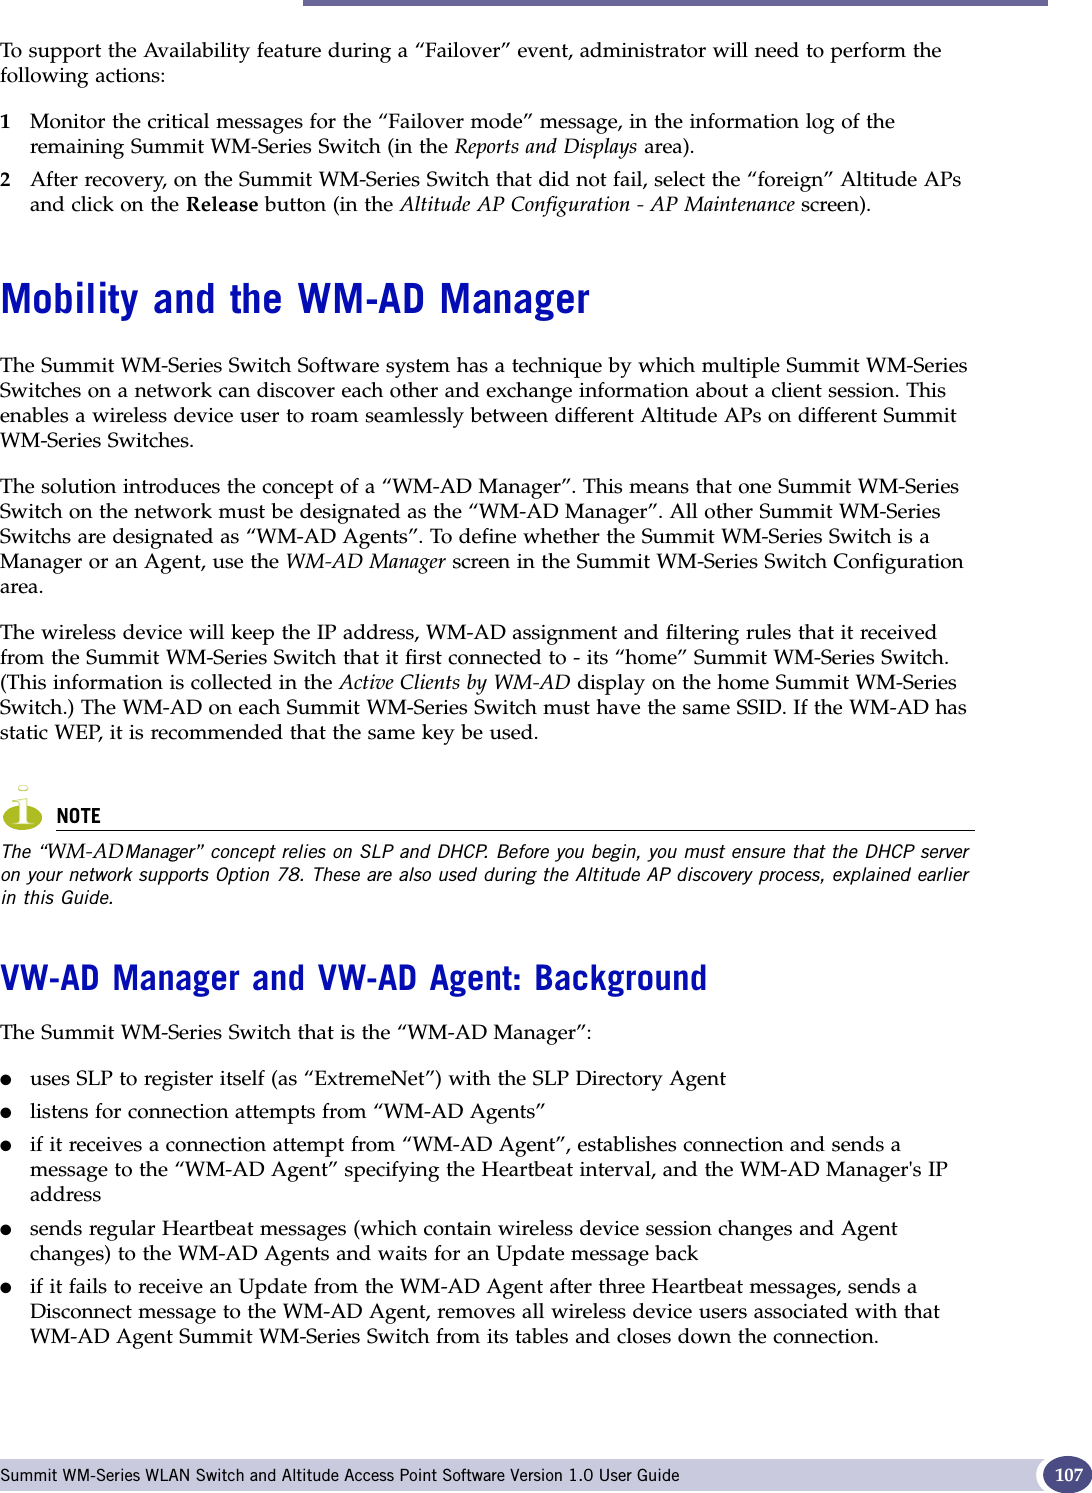 Mobility and the WM-AD Manager Summit WM-Series WLAN Switch and Altitude Access Point Software Version 1.0 User Guide 107To support the Availability feature during a “Failover” event, administrator will need to perform the following actions:1Monitor the critical messages for the “Failover mode” message, in the information log of the remaining Summit WM-Series Switch (in the Reports and Displays area).2After recovery, on the Summit WM-Series Switch that did not fail, select the “foreign” Altitude APs and click on the Release button (in the Altitude AP Configuration - AP Maintenance screen).Mobility and the WM-AD ManagerThe Summit WM-Series Switch Software system has a technique by which multiple Summit WM-Series Switches on a network can discover each other and exchange information about a client session. This enables a wireless device user to roam seamlessly between different Altitude APs on different Summit WM-Series Switches. The solution introduces the concept of a “WM-AD Manager”. This means that one Summit WM-Series Switch on the network must be designated as the “WM-AD Manager”. All other Summit WM-Series Switchs are designated as “WM-AD Agents”. To define whether the Summit WM-Series Switch is a Manager or an Agent, use the WM-AD Manager screen in the Summit WM-Series Switch Configuration area.The wireless device will keep the IP address, WM-AD assignment and filtering rules that it received from the Summit WM-Series Switch that it first connected to - its “home” Summit WM-Series Switch. (This information is collected in the Active Clients by WM-AD display on the home Summit WM-Series Switch.) The WM-AD on each Summit WM-Series Switch must have the same SSID. If the WM-AD has static WEP, it is recommended that the same key be used.NOTEThe “WM-ADManager” concept relies on SLP and DHCP. Before you begin, you must ensure that the DHCP server on your network supports Option 78. These are also used during the Altitude AP discovery process, explained earlier in this Guide.VW-AD Manager and VW-AD Agent: BackgroundThe Summit WM-Series Switch that is the “WM-AD Manager”:●uses SLP to register itself (as “ExtremeNet”) with the SLP Directory Agent●listens for connection attempts from “WM-AD Agents”●if it receives a connection attempt from “WM-AD Agent”, establishes connection and sends a message to the “WM-AD Agent” specifying the Heartbeat interval, and the WM-AD Manager&apos;s IP address●sends regular Heartbeat messages (which contain wireless device session changes and Agent changes) to the WM-AD Agents and waits for an Update message back●if it fails to receive an Update from the WM-AD Agent after three Heartbeat messages, sends a Disconnect message to the WM-AD Agent, removes all wireless device users associated with that WM-AD Agent Summit WM-Series Switch from its tables and closes down the connection.